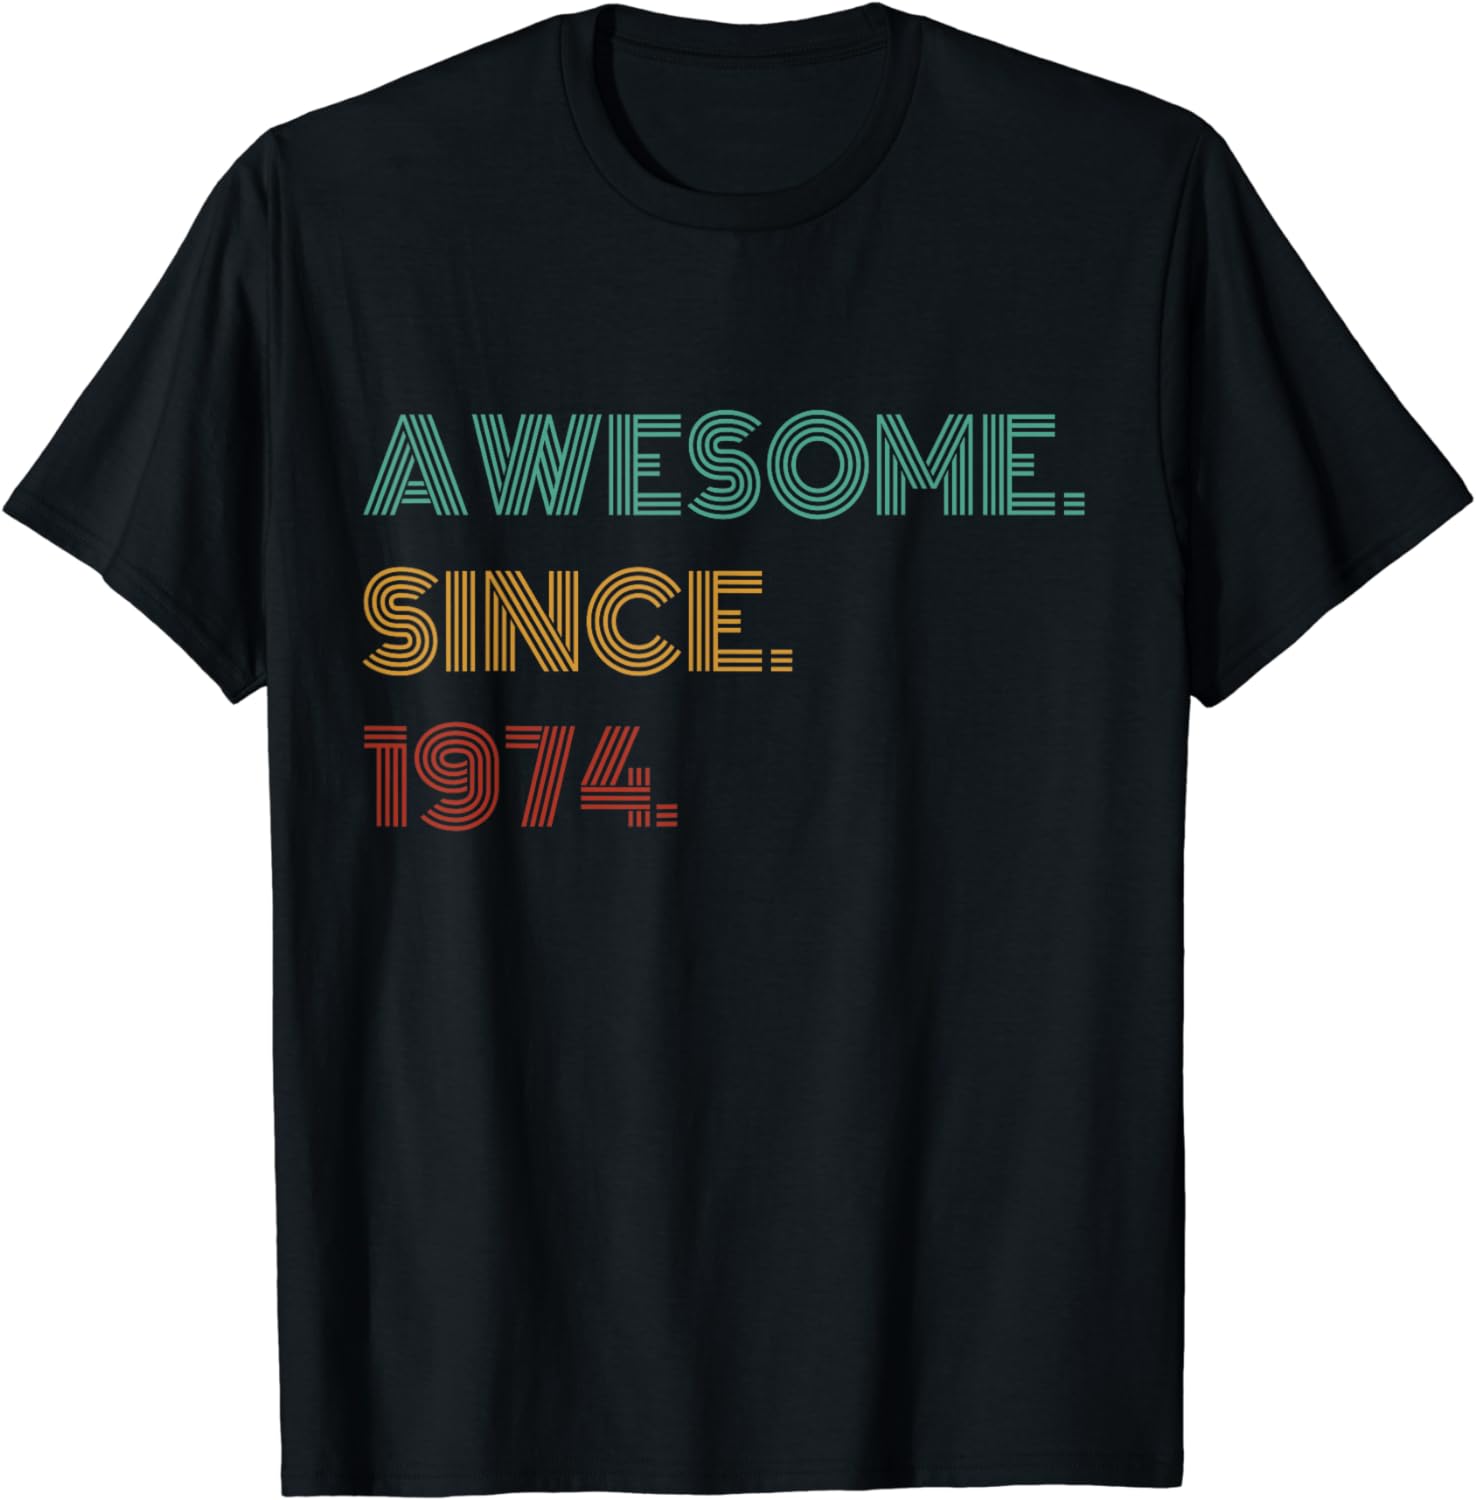 50 Years Old Awesome Since 1974 50th Birthday T-Shirt - Buy t-shirt designs